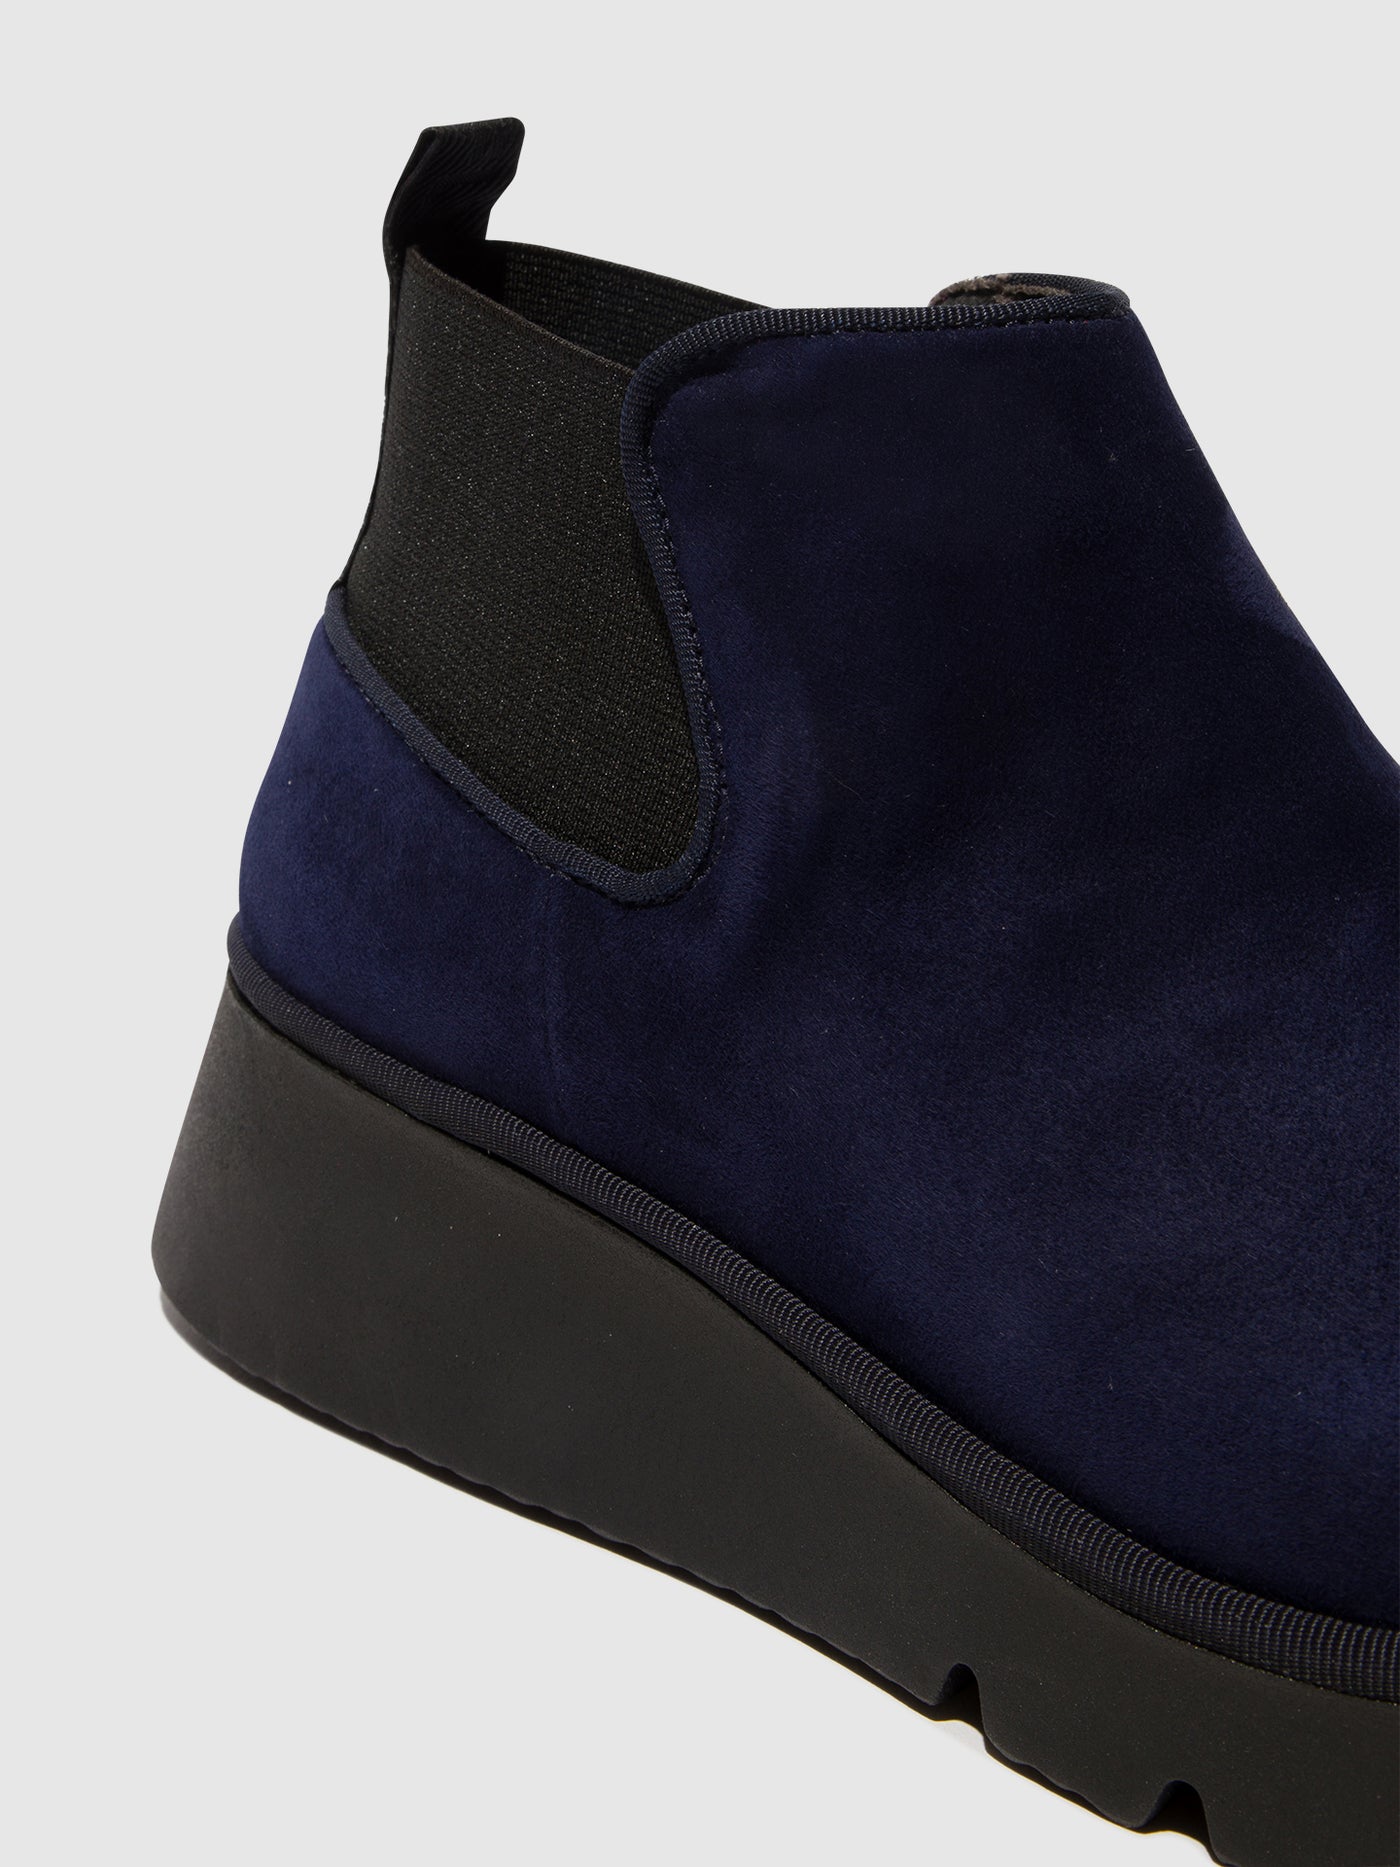 Elasticated Ankle Boots PADA403FLY NAVY